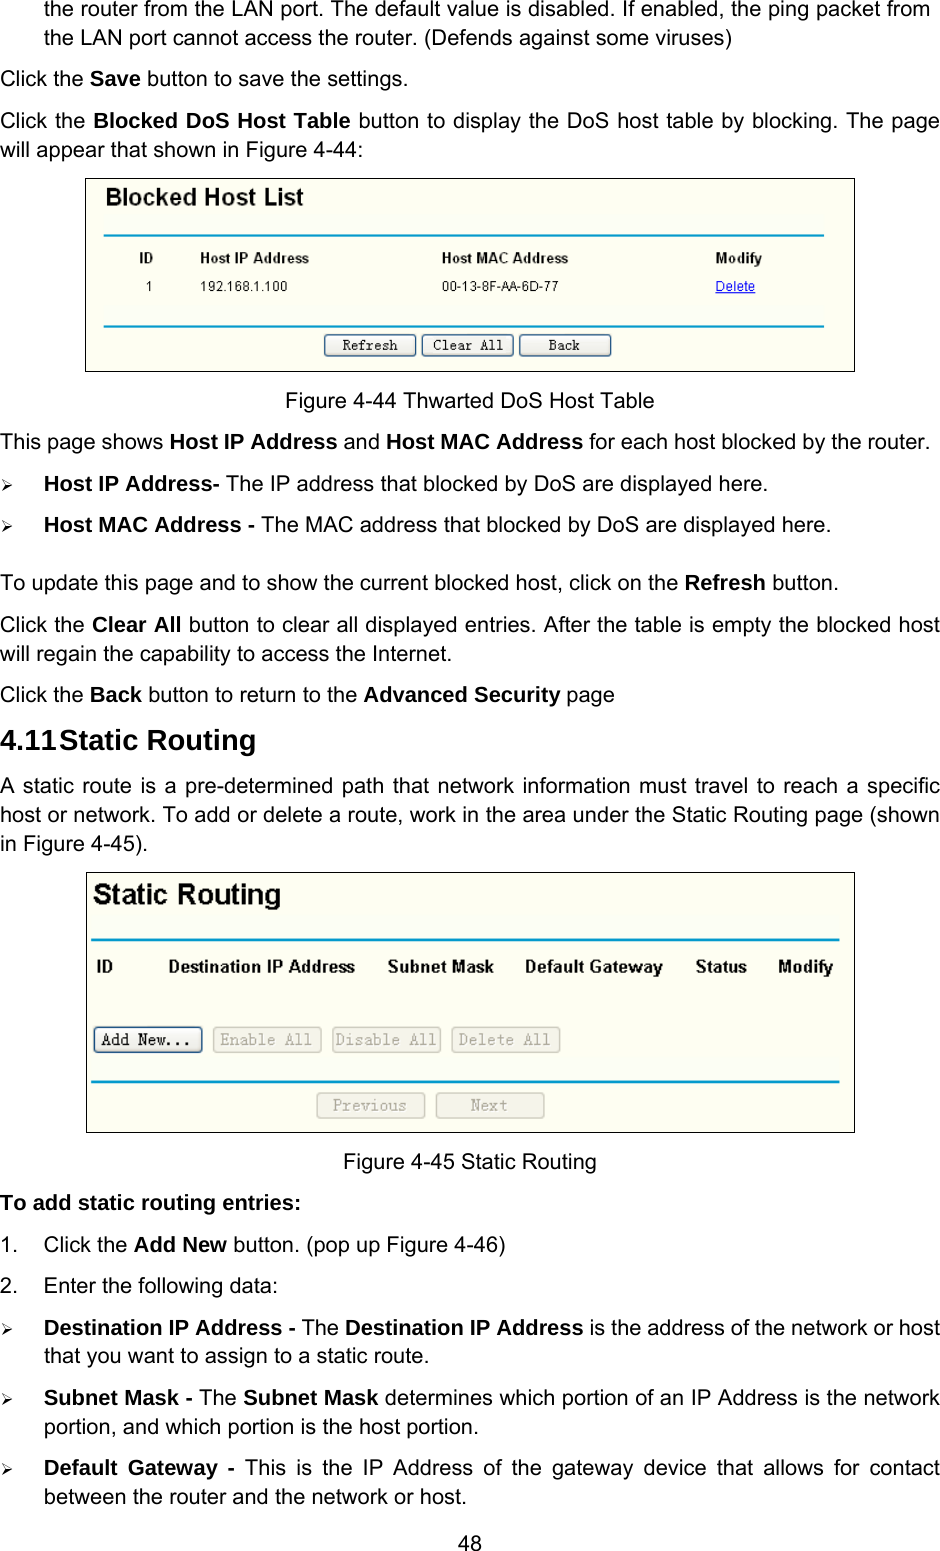  48 the router from the LAN port. The default value is disabled. If enabled, the ping packet from the LAN port cannot access the router. (Defends against some viruses) Click the Save button to save the settings. Click the Blocked DoS Host Table button to display the DoS host table by blocking. The page will appear that shown in Figure 4-44:  Figure 4-44 Thwarted DoS Host Table This page shows Host IP Address and Host MAC Address for each host blocked by the router.   ¾ Host IP Address- The IP address that blocked by DoS are displayed here. ¾ Host MAC Address - The MAC address that blocked by DoS are displayed here. To update this page and to show the current blocked host, click on the Refresh button. Click the Clear All button to clear all displayed entries. After the table is empty the blocked host will regain the capability to access the Internet.   Click the Back button to return to the Advanced Security page 4.11 Static Routing A static route is a pre-determined path that network information must travel to reach a specific host or network. To add or delete a route, work in the area under the Static Routing page (shown in Figure 4-45).  Figure 4-45 Static Routing To add static routing entries: 1. Click the Add New button. (pop up Figure 4-46) 2.  Enter the following data: ¾ Destination IP Address - The Destination IP Address is the address of the network or host that you want to assign to a static route.  ¾ Subnet Mask - The Subnet Mask determines which portion of an IP Address is the network portion, and which portion is the host portion. ¾ Default Gateway - This is the IP Address of the gateway device that allows for contact between the router and the network or host. 